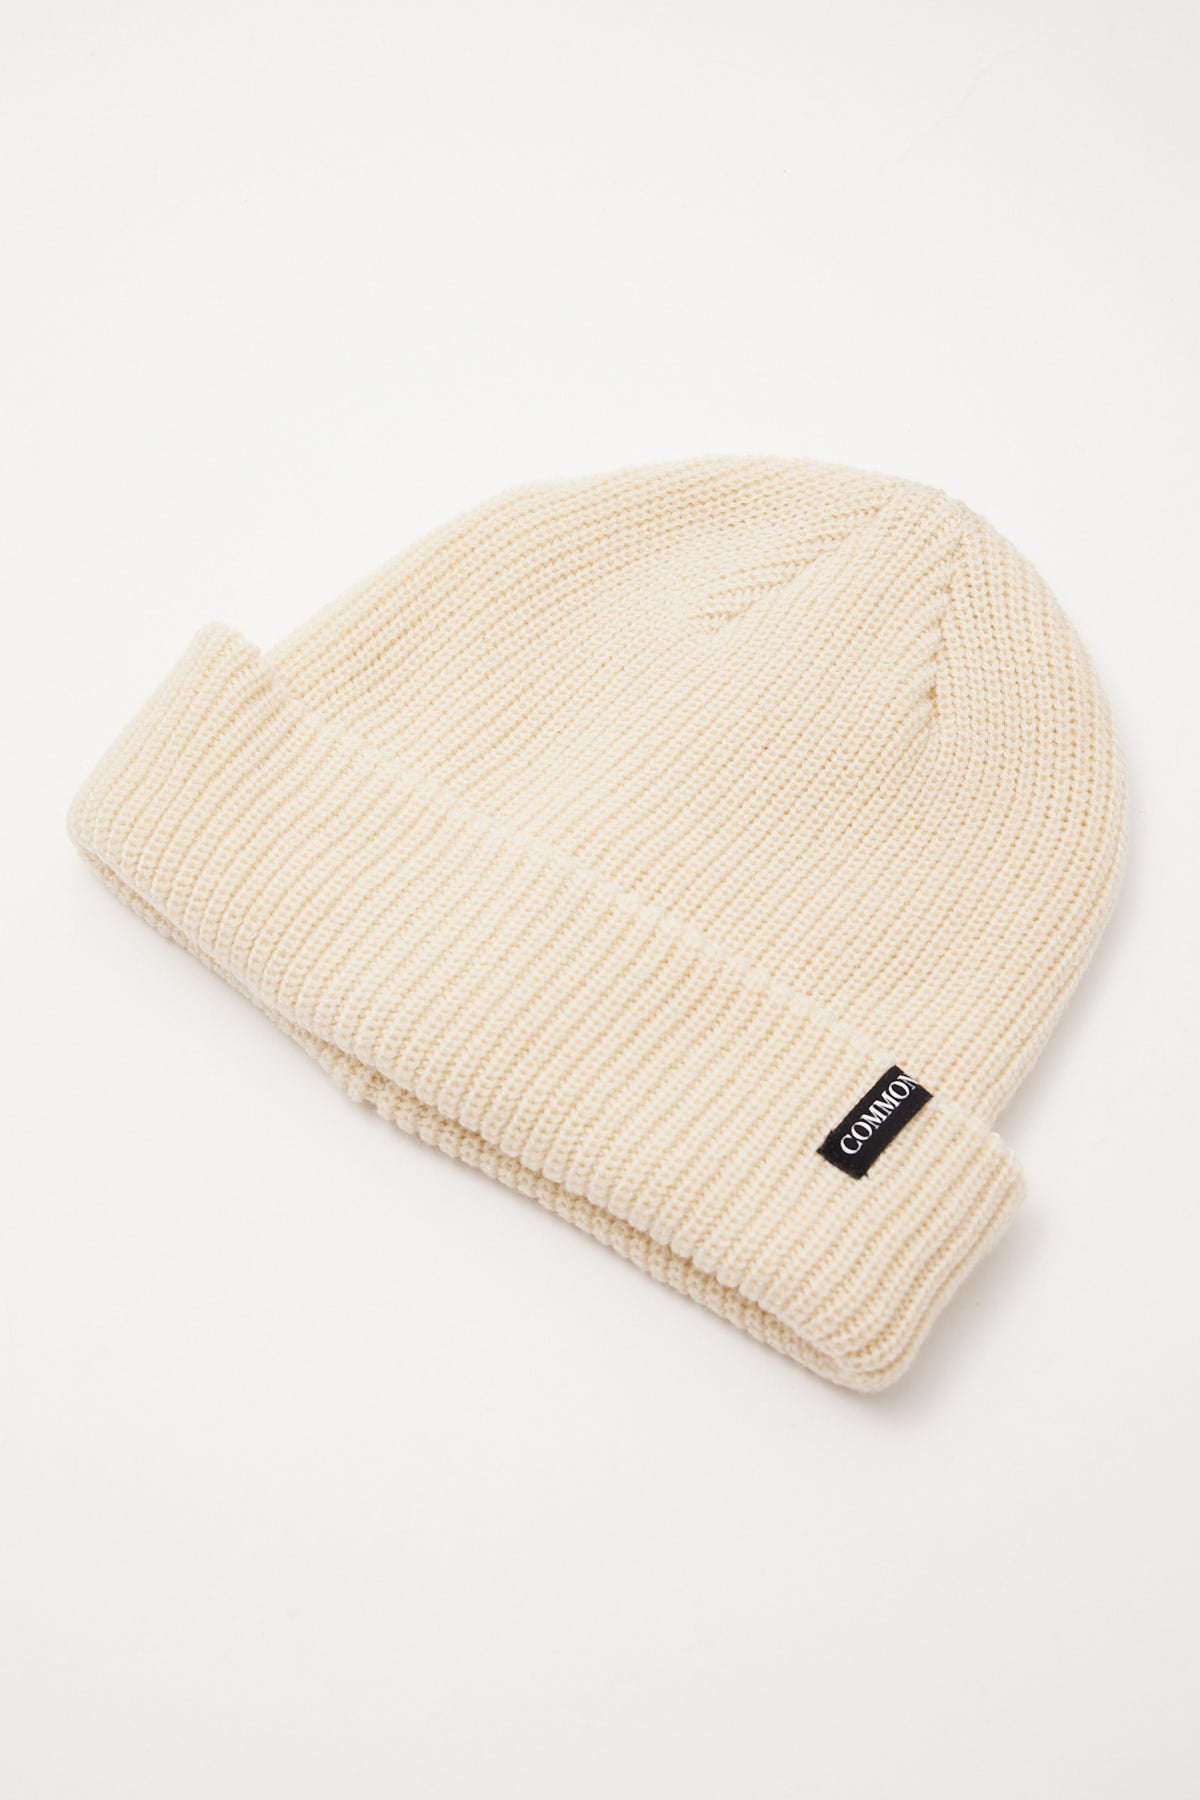 Common Need Better Low Profile Beanie Off White – Universal Store